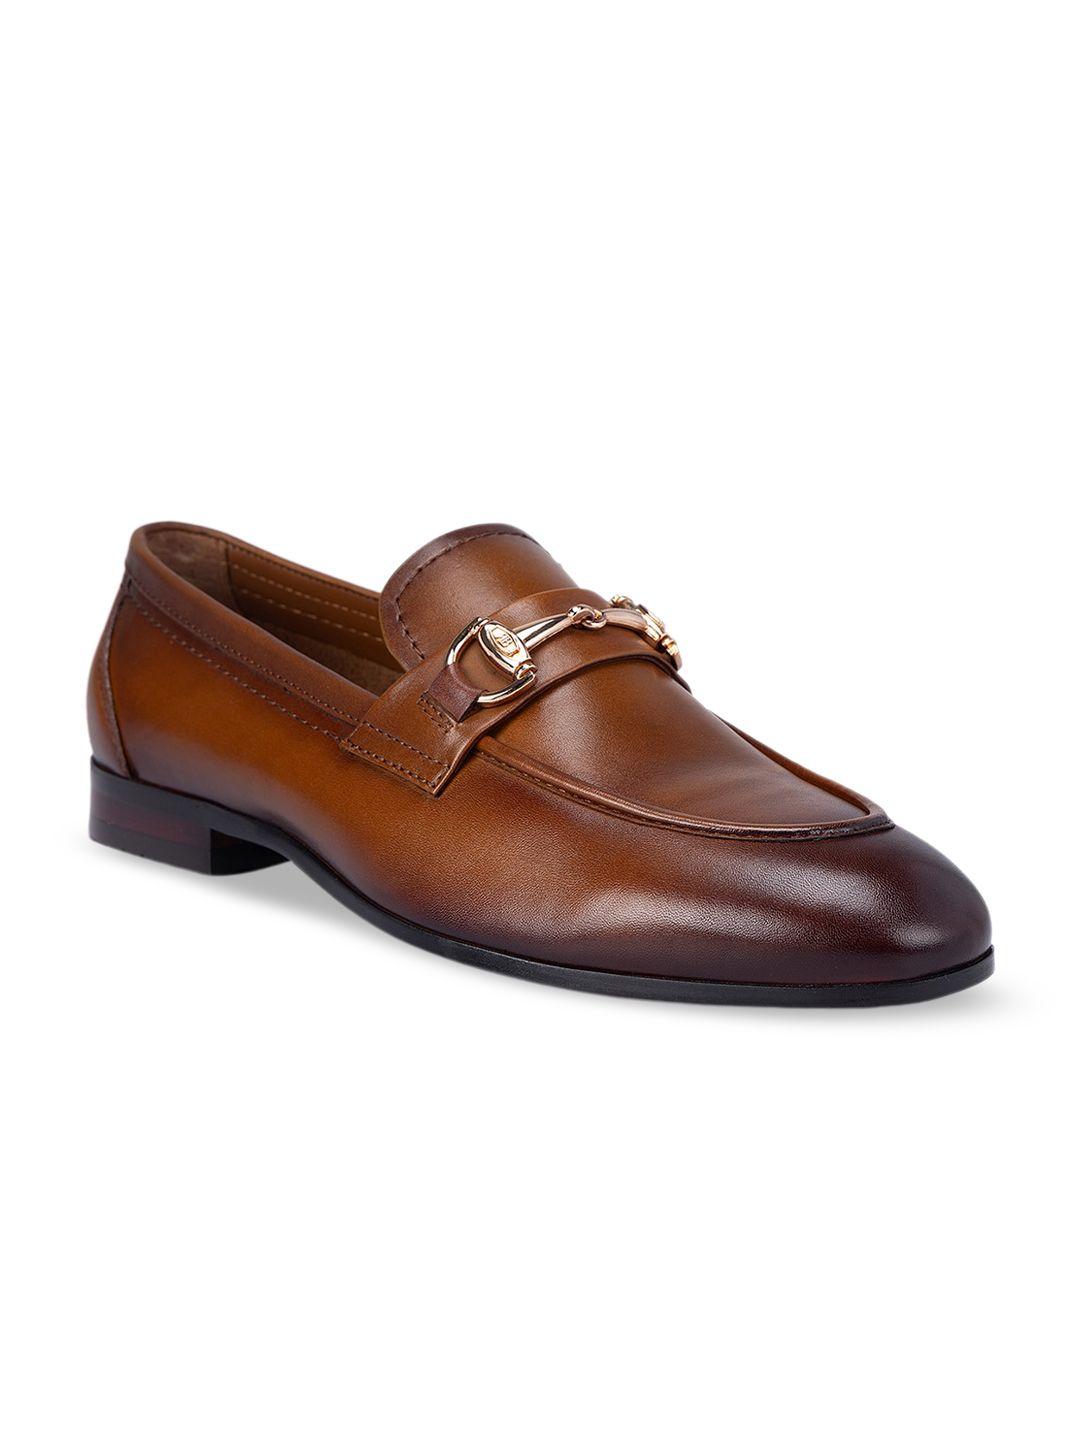 ROSSO BRUNELLO Men Leather Formal Loafers